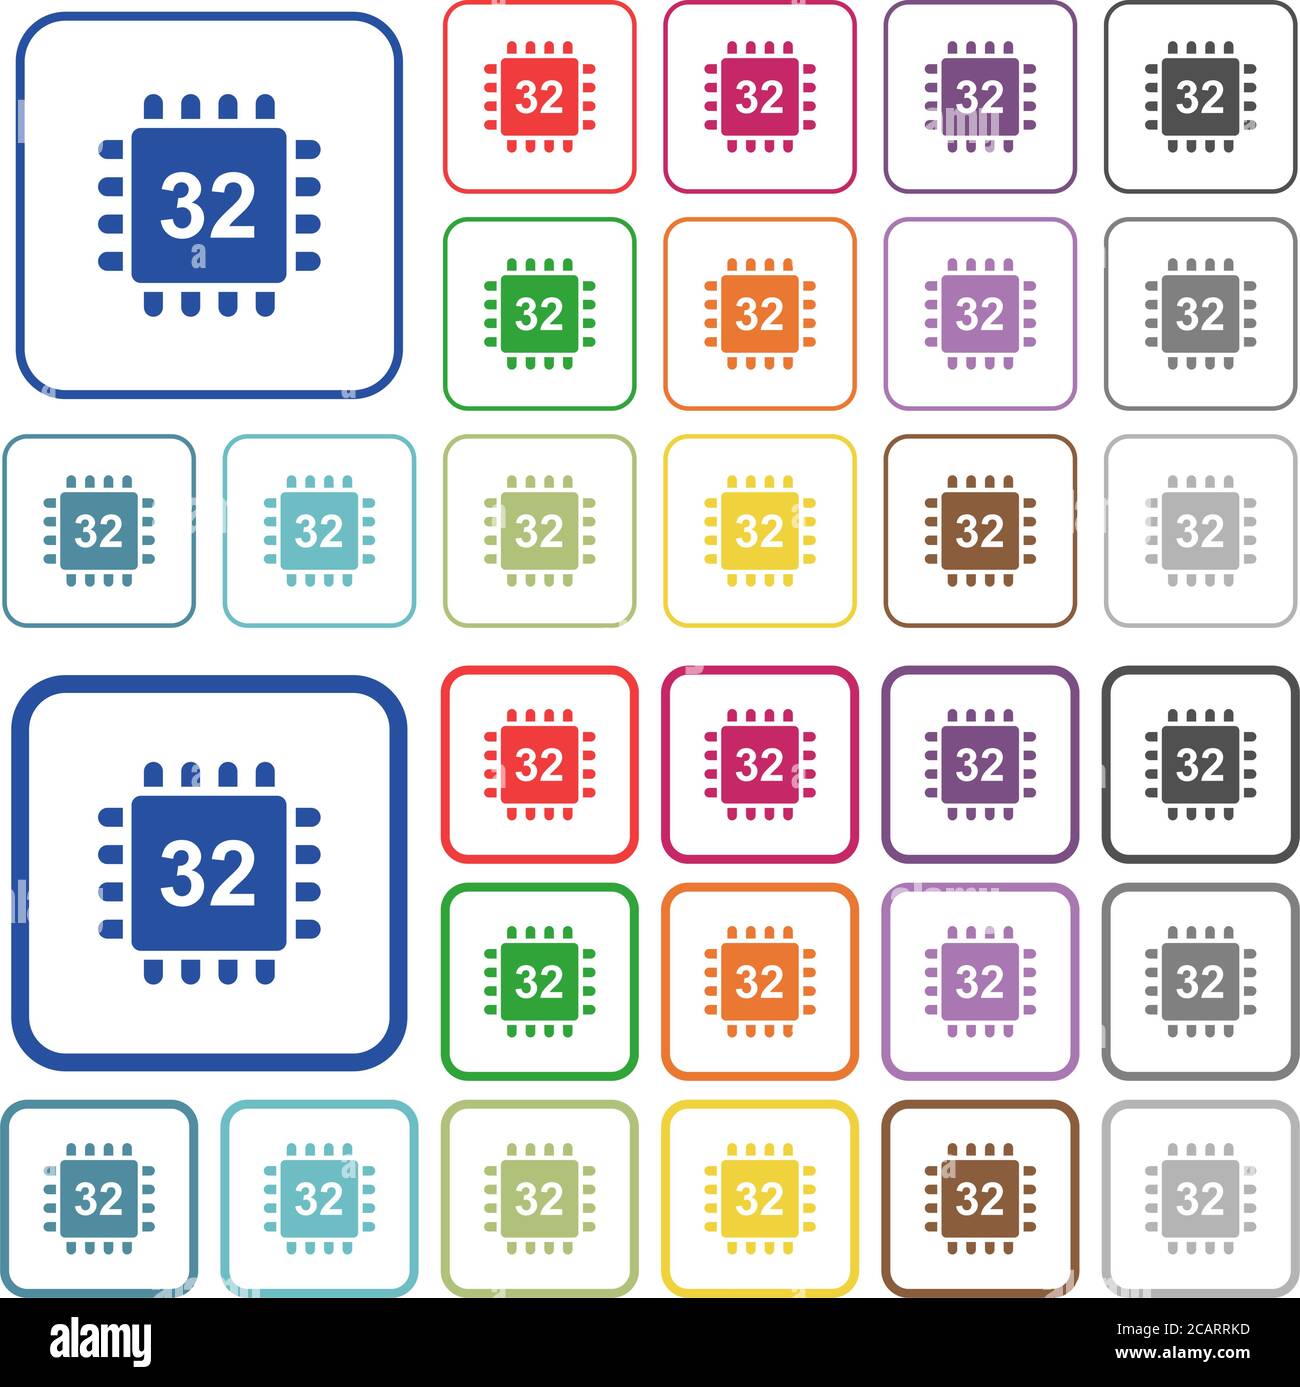 Microprocessor 32 bit architecture color flat icons in rounded square frames. Thin and thick versions included. Stock Vector